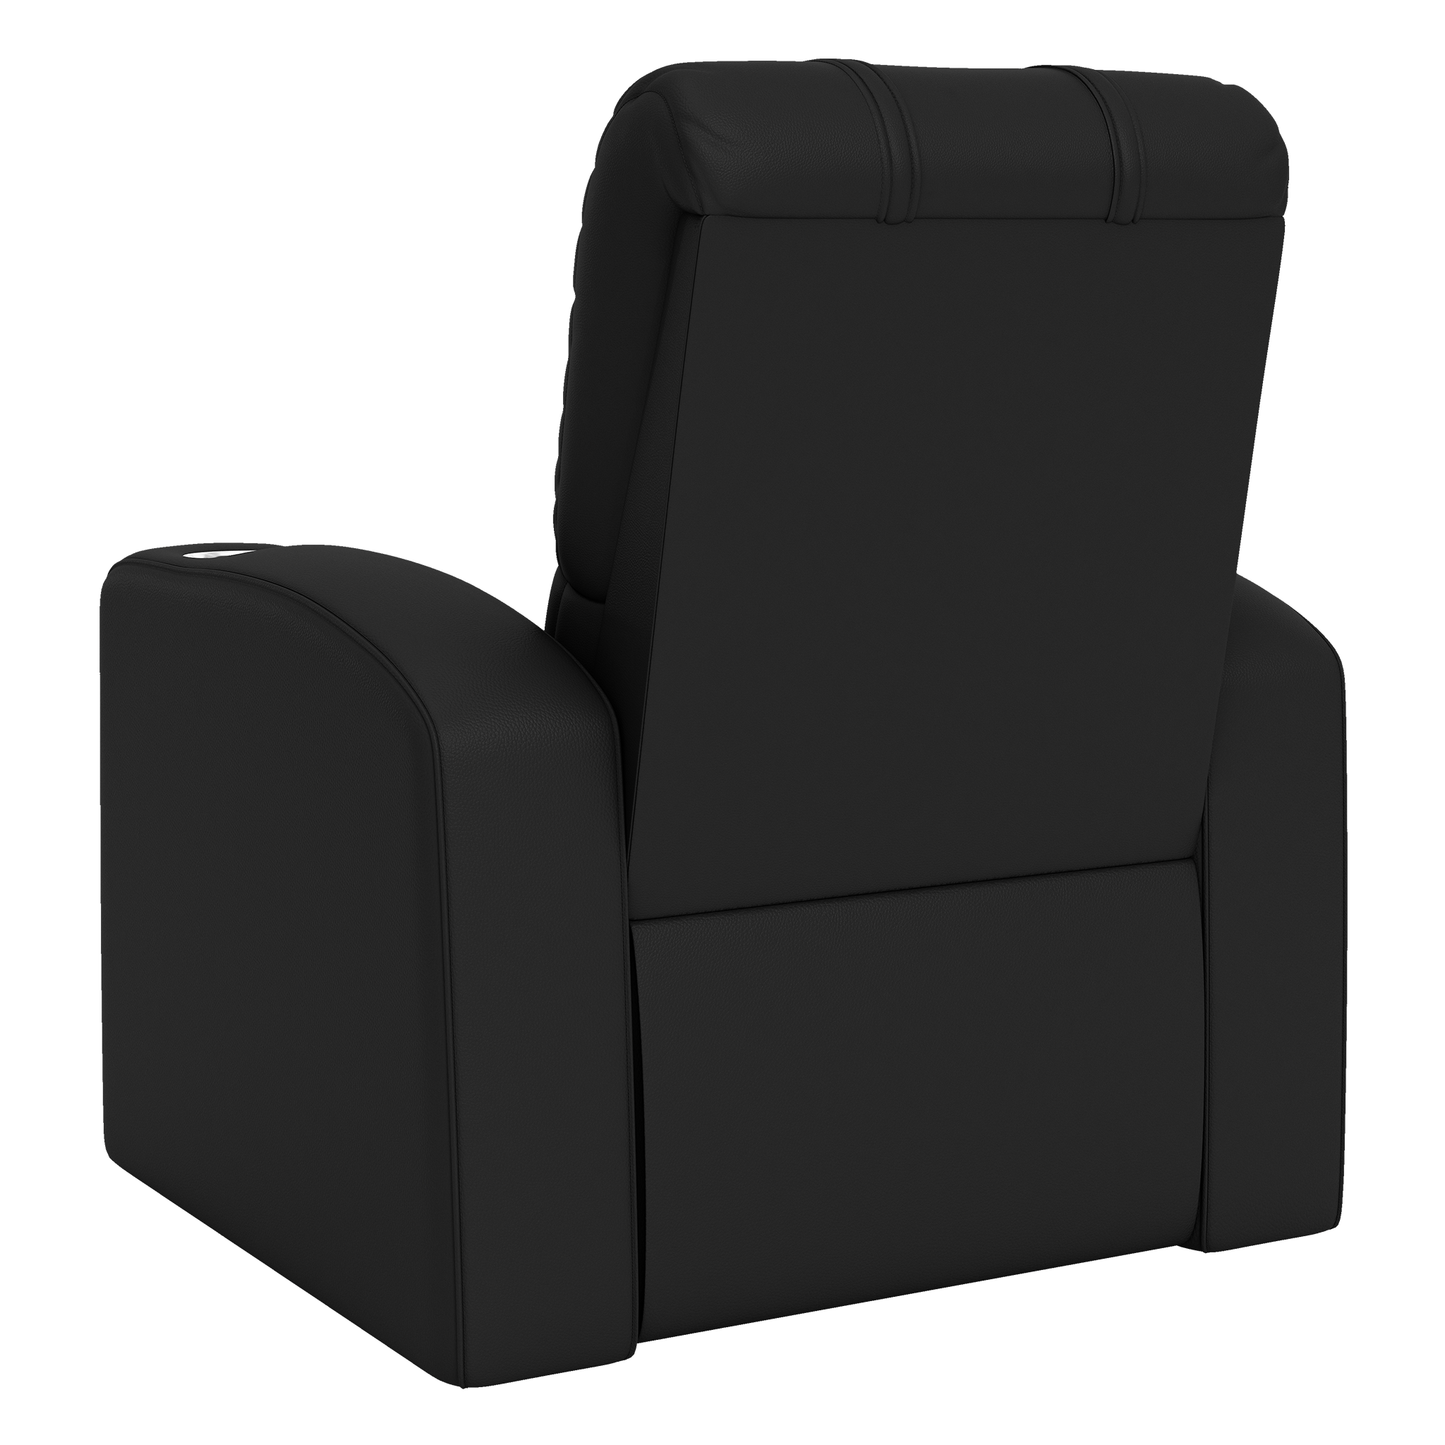 Relax Home Theater Recliner with Tampa Bay Lightning Alternate Logo